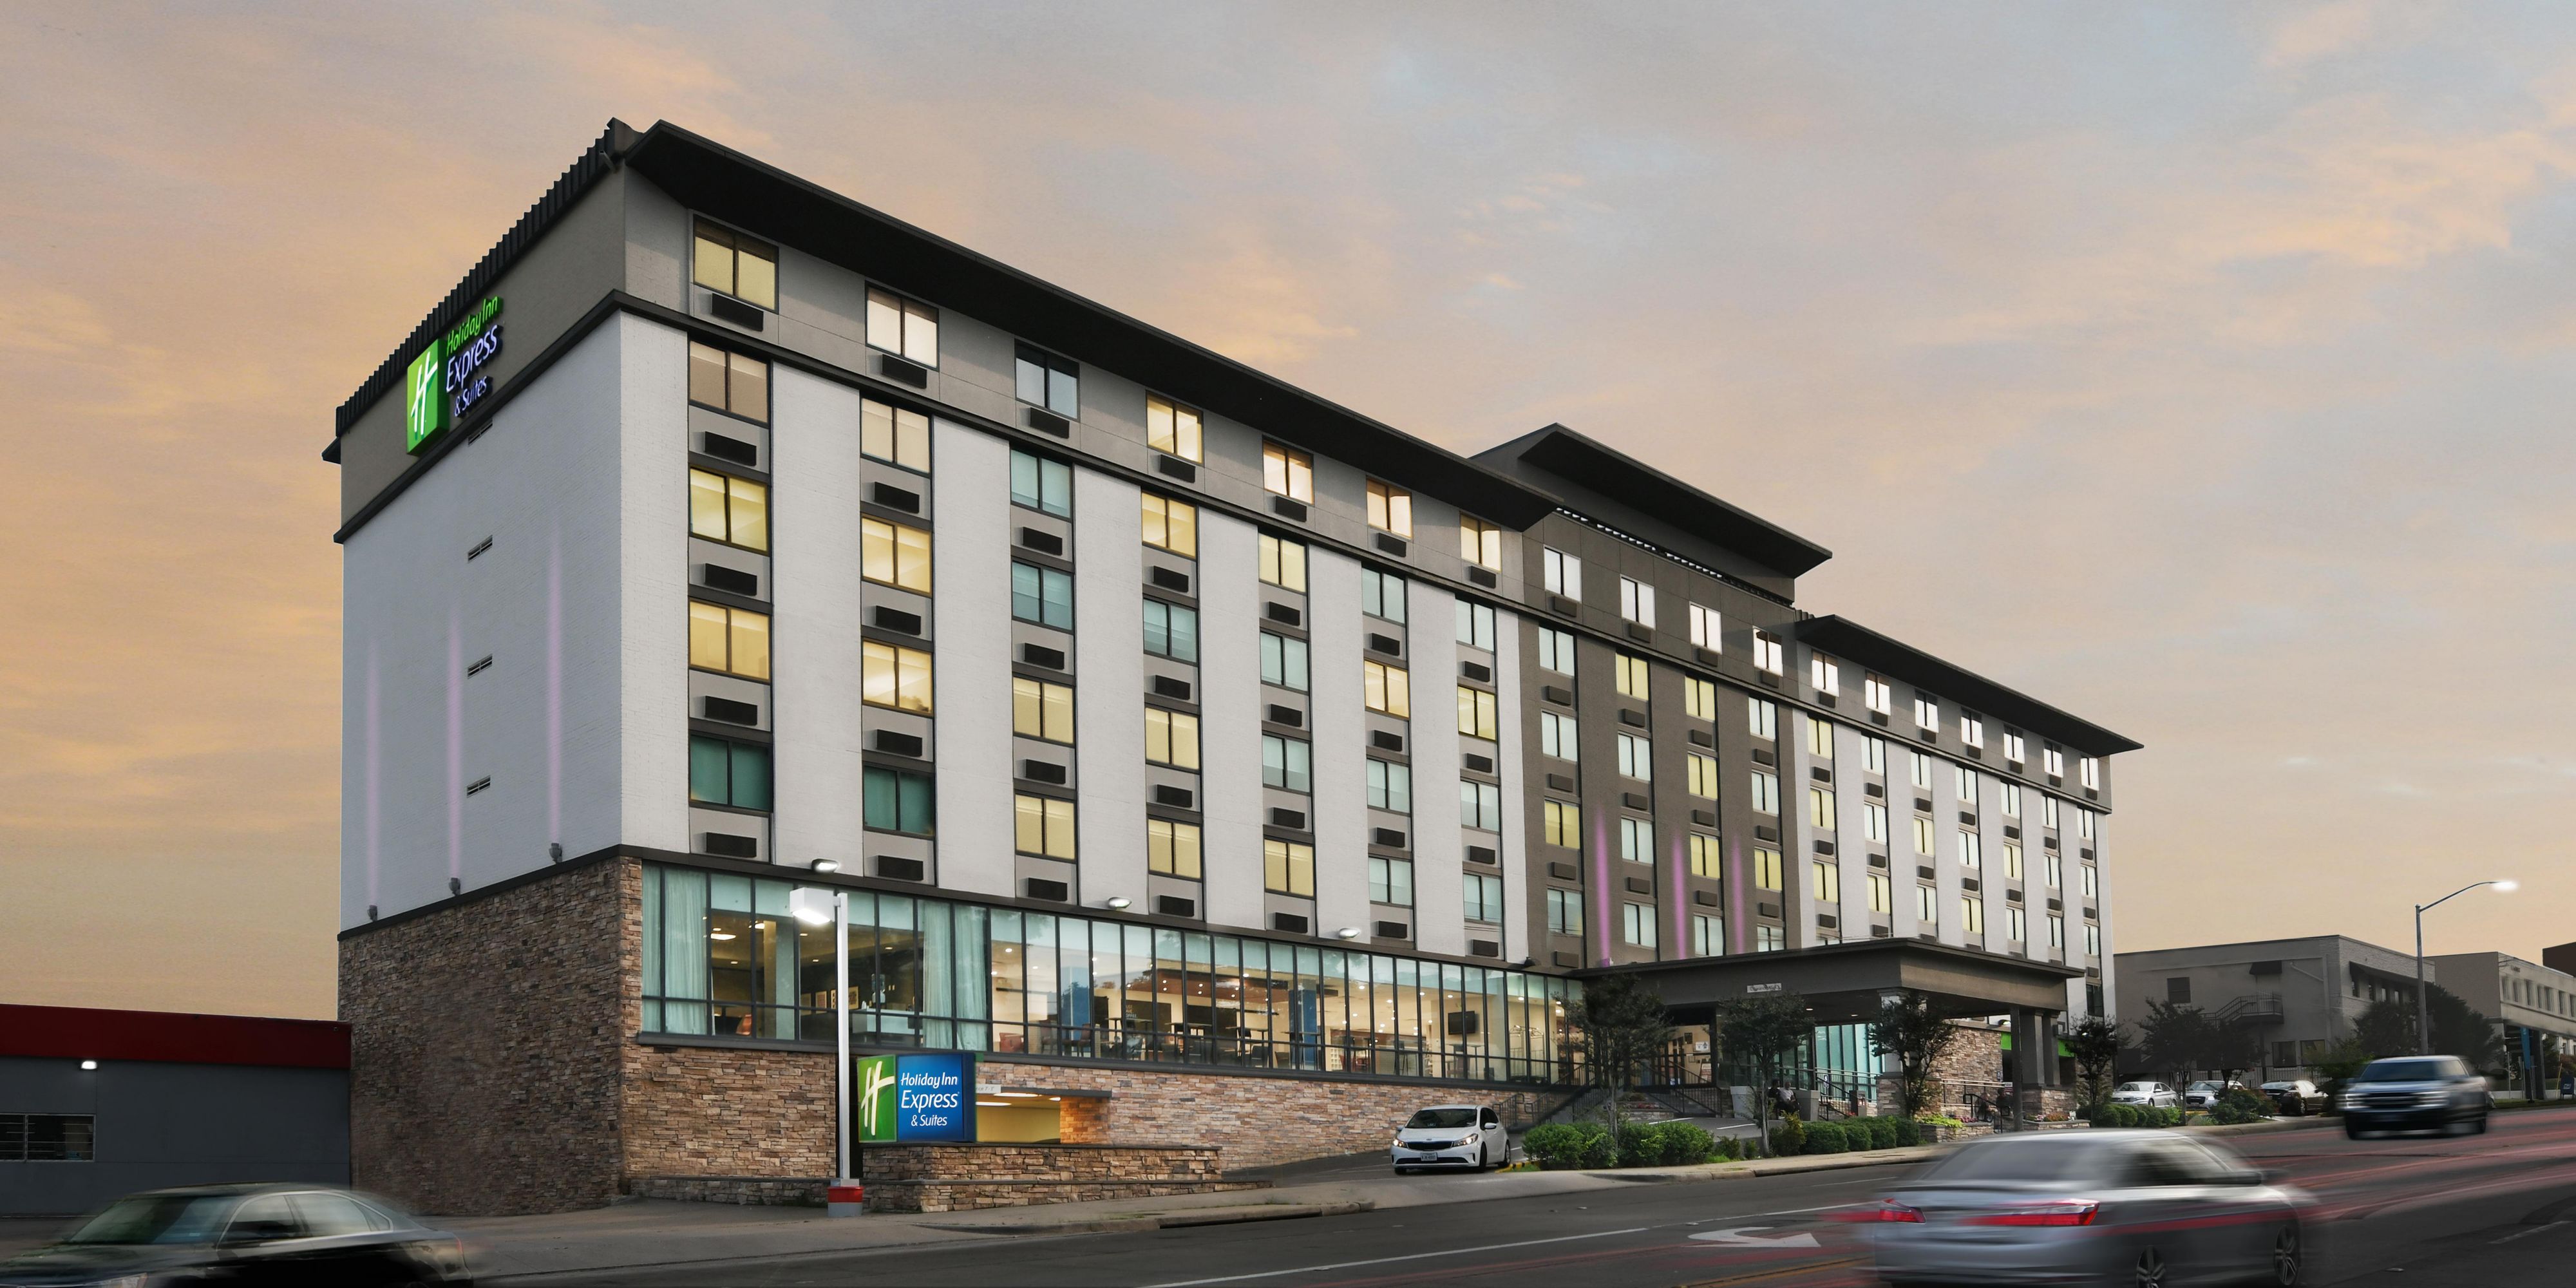 Stay at the conveniently situated Holiday Inn Express & Suites Fort Worth Downtown, less than 10 minutes from Texas Christian University, Fort Worth's Medical District, and downtown's vibrant offerings. Embrace the fusion of old and new in this cultural city.